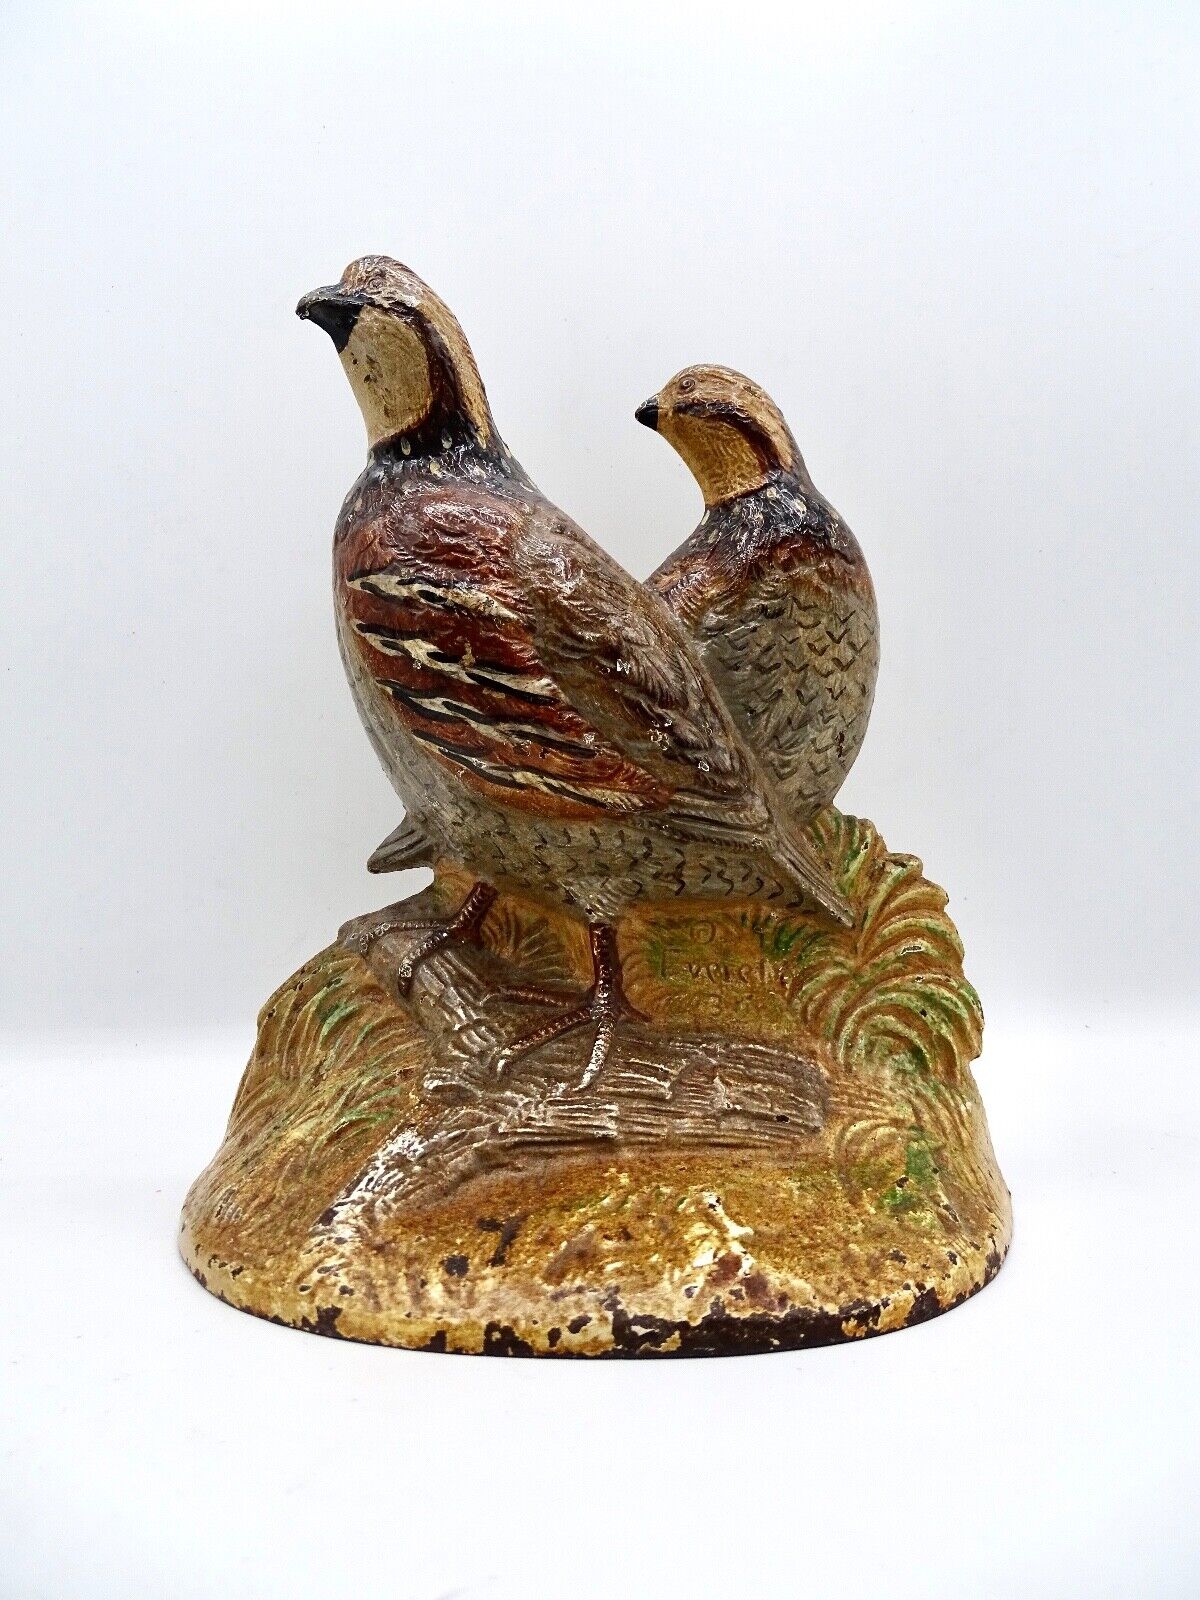 ANTQUE QUAIL CAST IRON DOORSTOP SIGNED BY FRED EVERETT  1934 HUBLEY PA